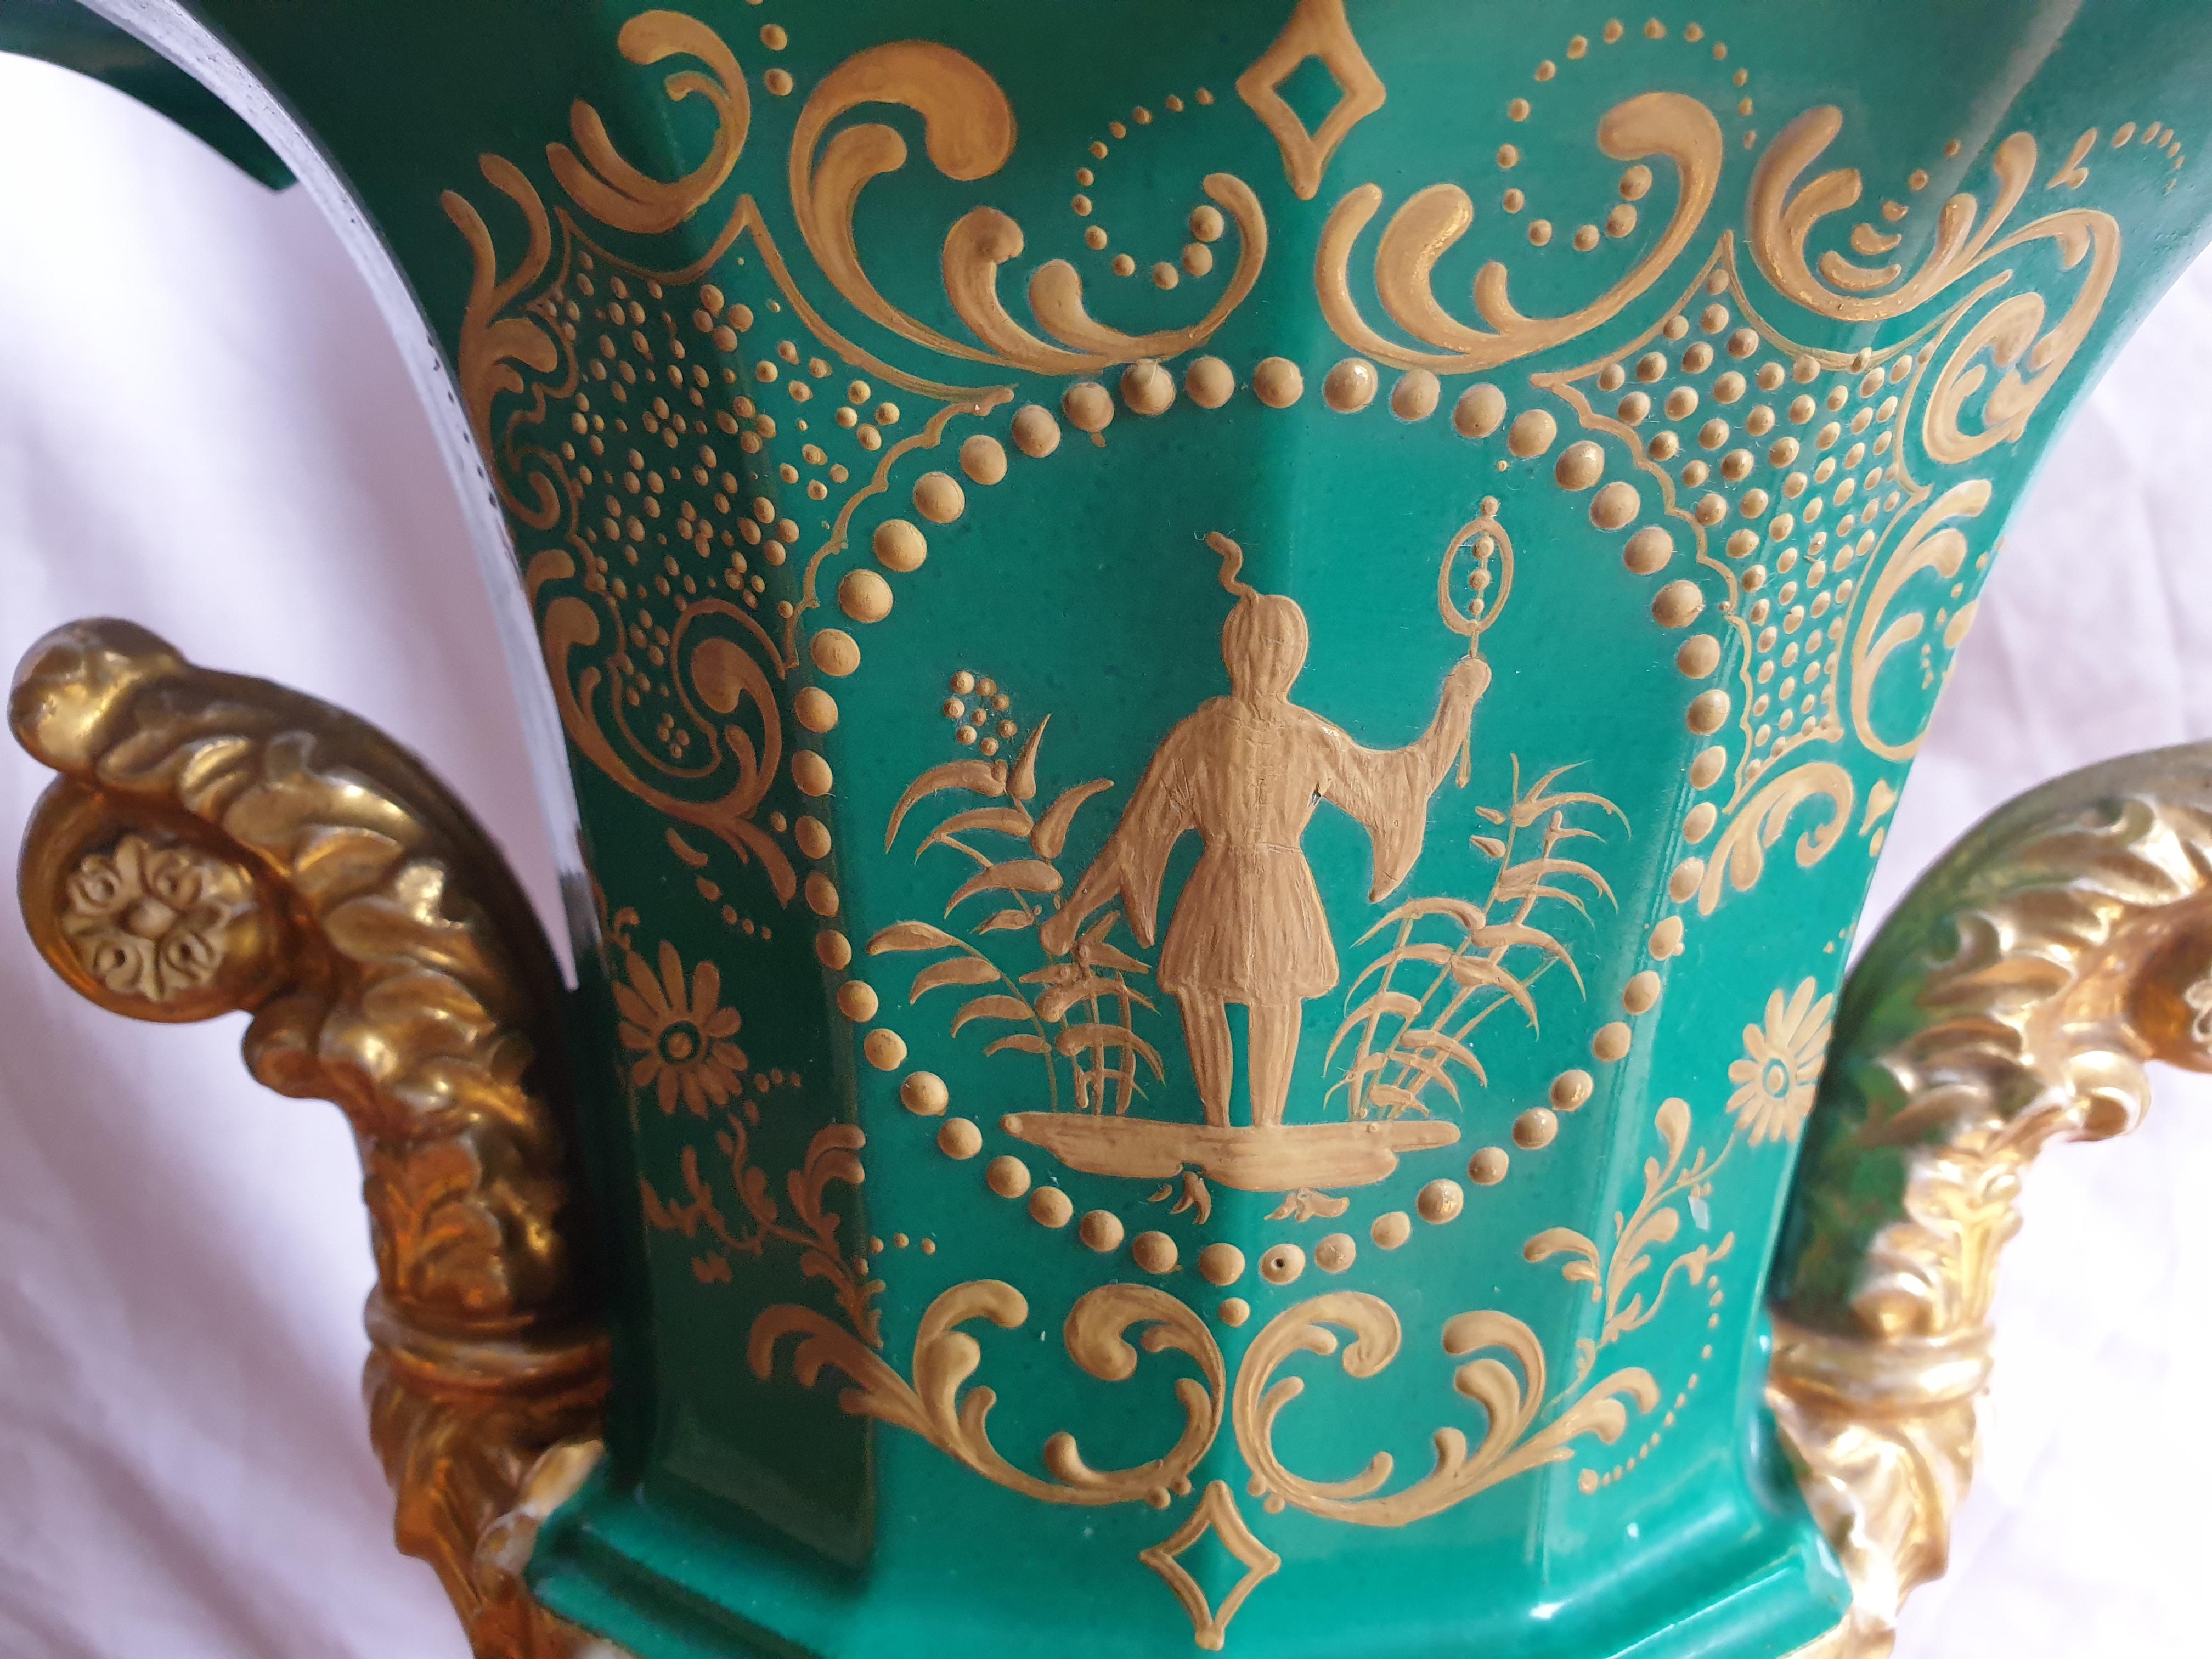 Jacob Petit Hand Painted Urn Vases with Gilding Detailing and Jewelling For Sale 12